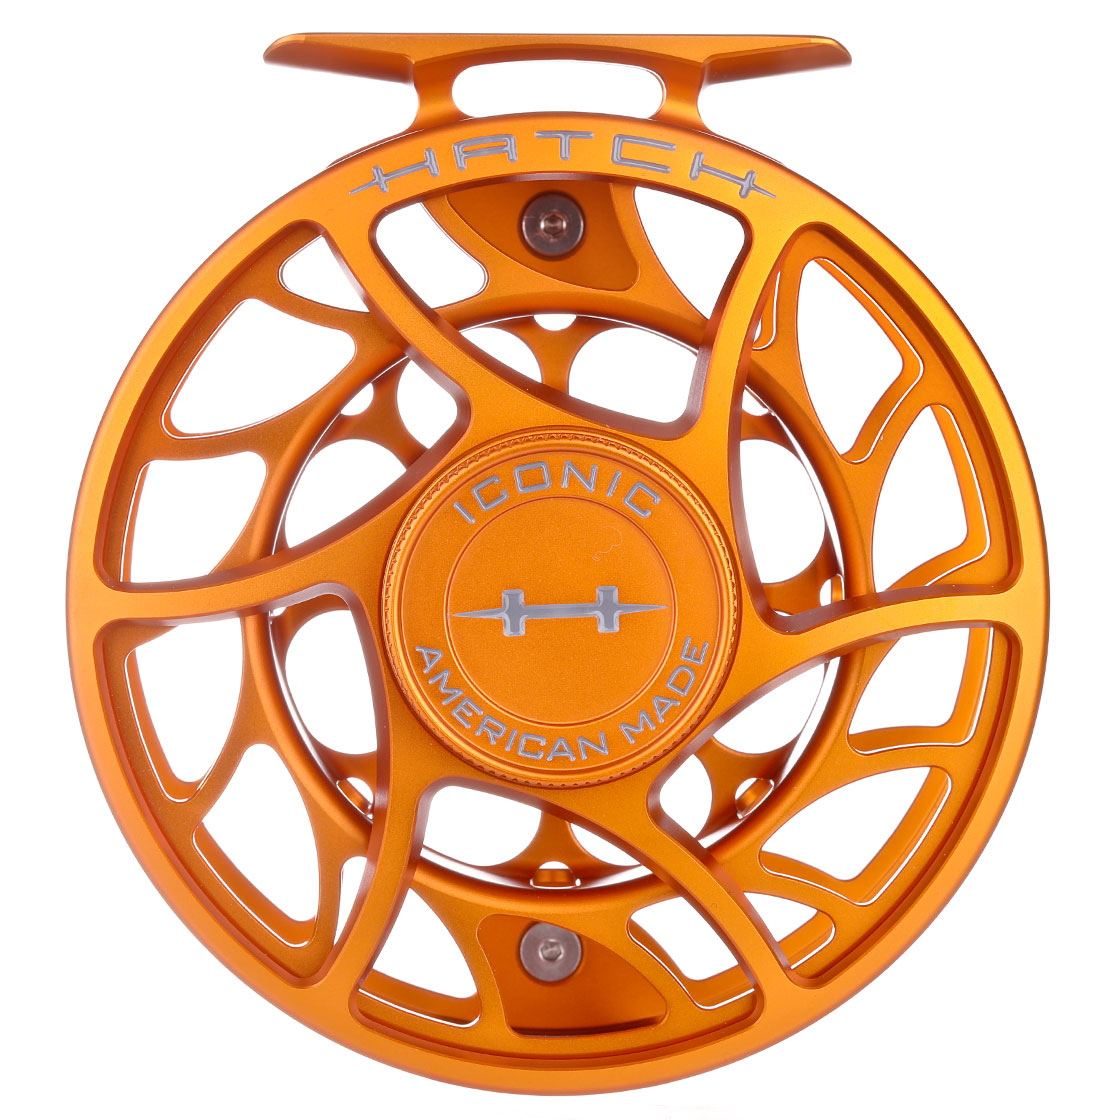 https://www.adh-fishing.com/media/image/9e/84/42/P-24356_Hatch-Iconic-Fly-Reel-Fliegenrolle-Large-Arbor-Limited-Edition-campfire-orange_foto-1.jpg